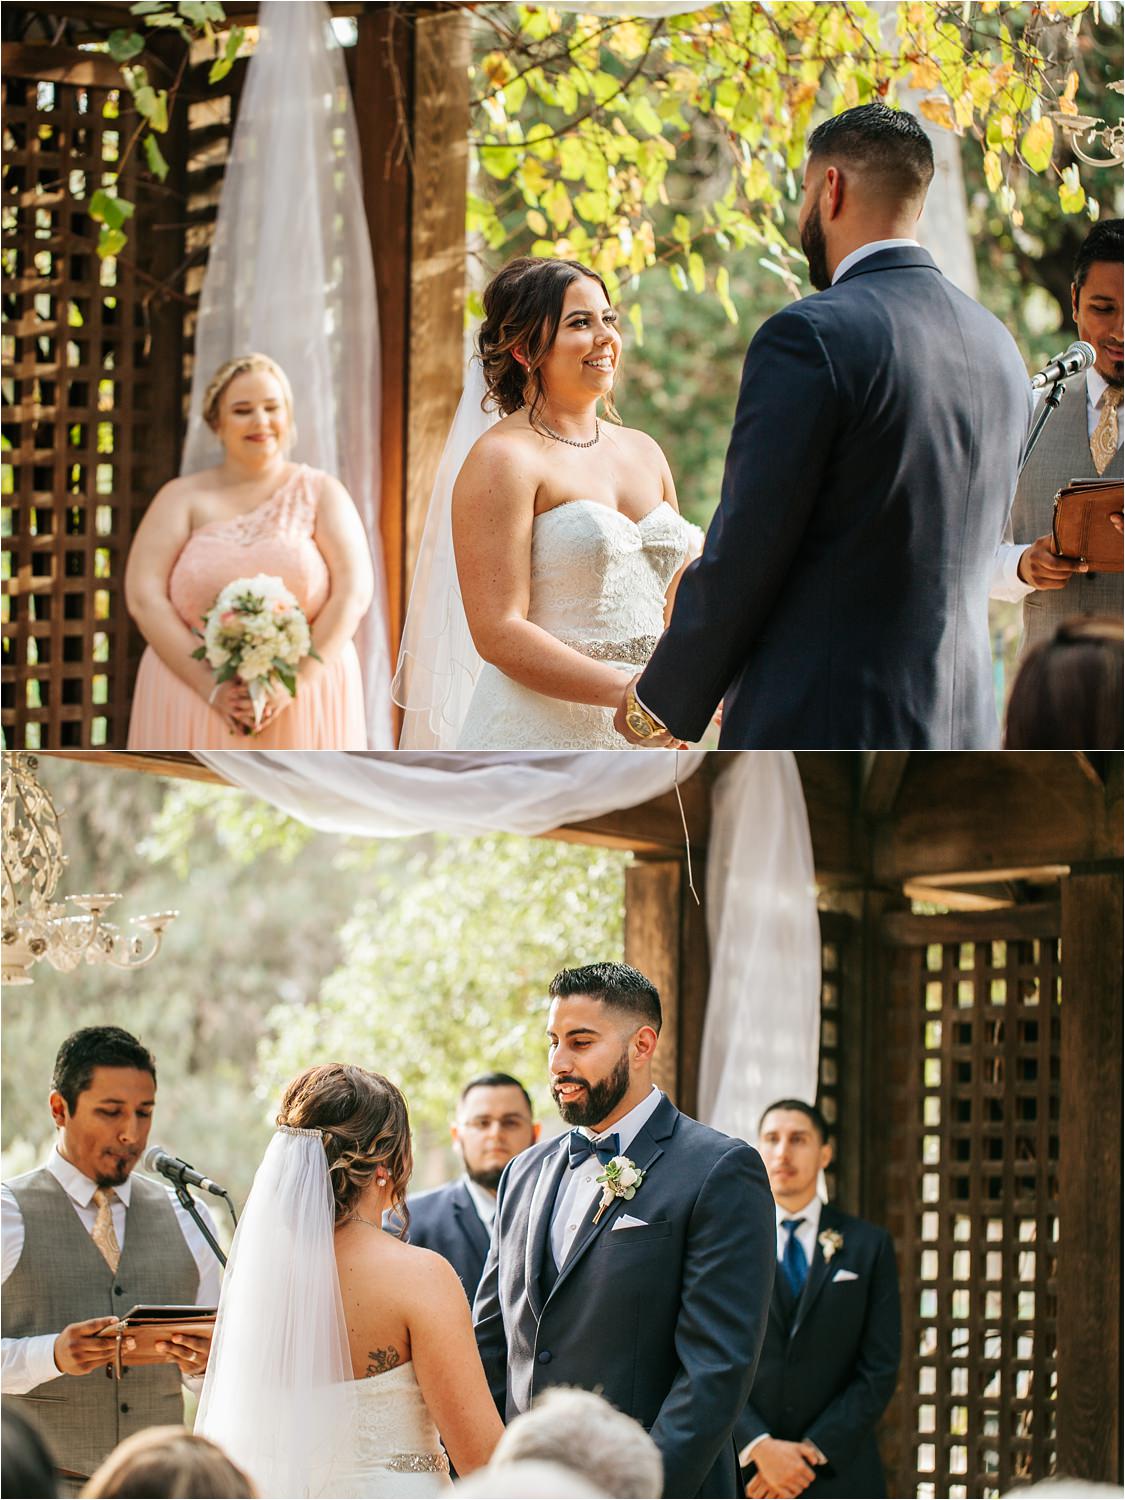 Fall Wedding - Bride and Groom saying vows - http://brittneyhannonphotography.com